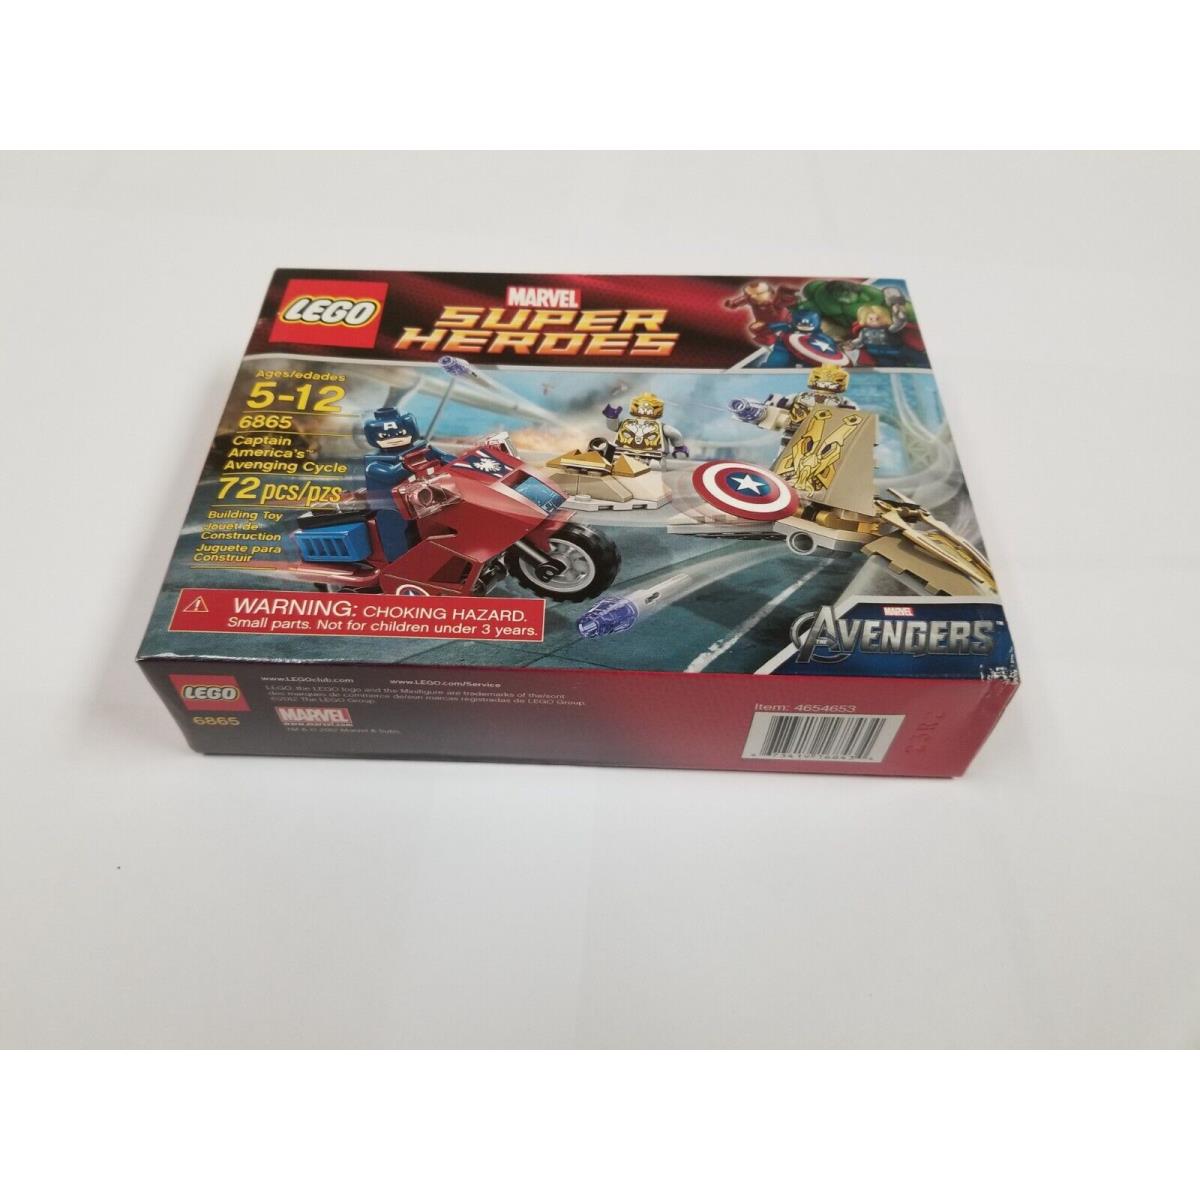 Lego Marvel Super Heroes Captain America`s Avenging Cycle 6865